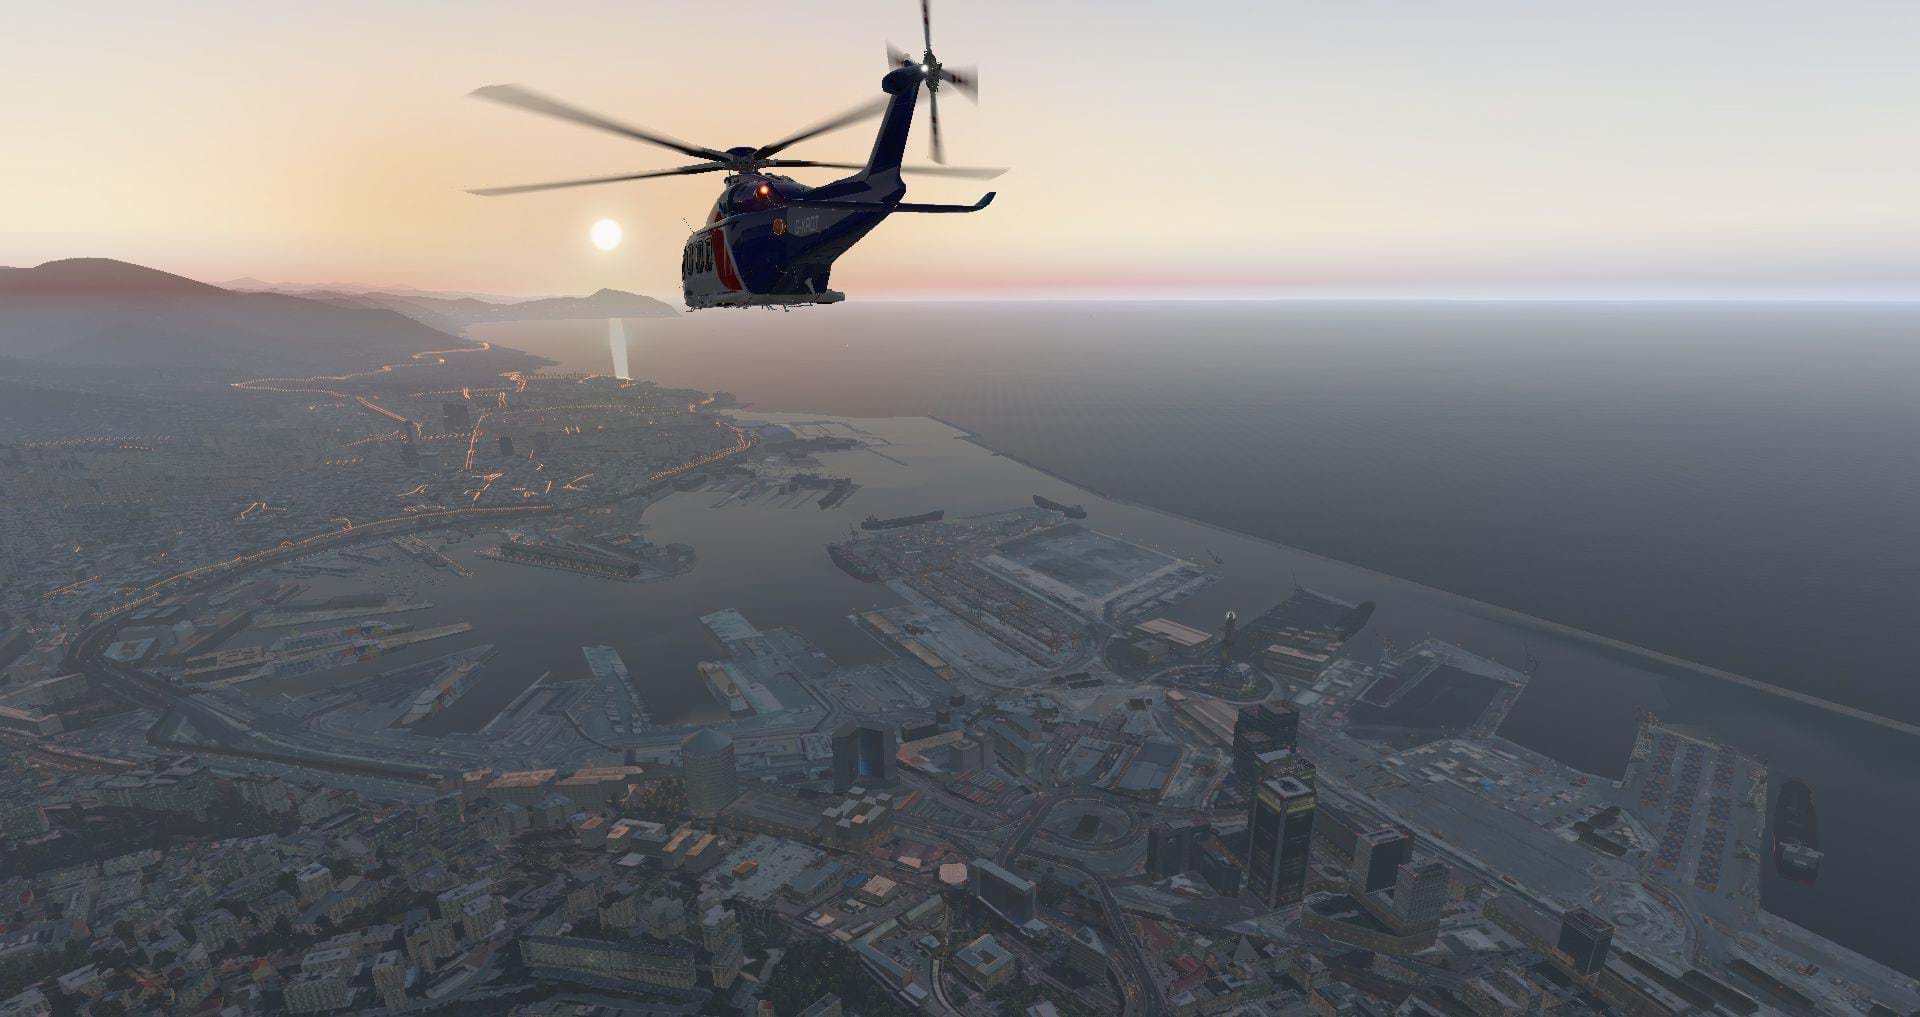 X-Rotors released update for the AW139 or X-Plane